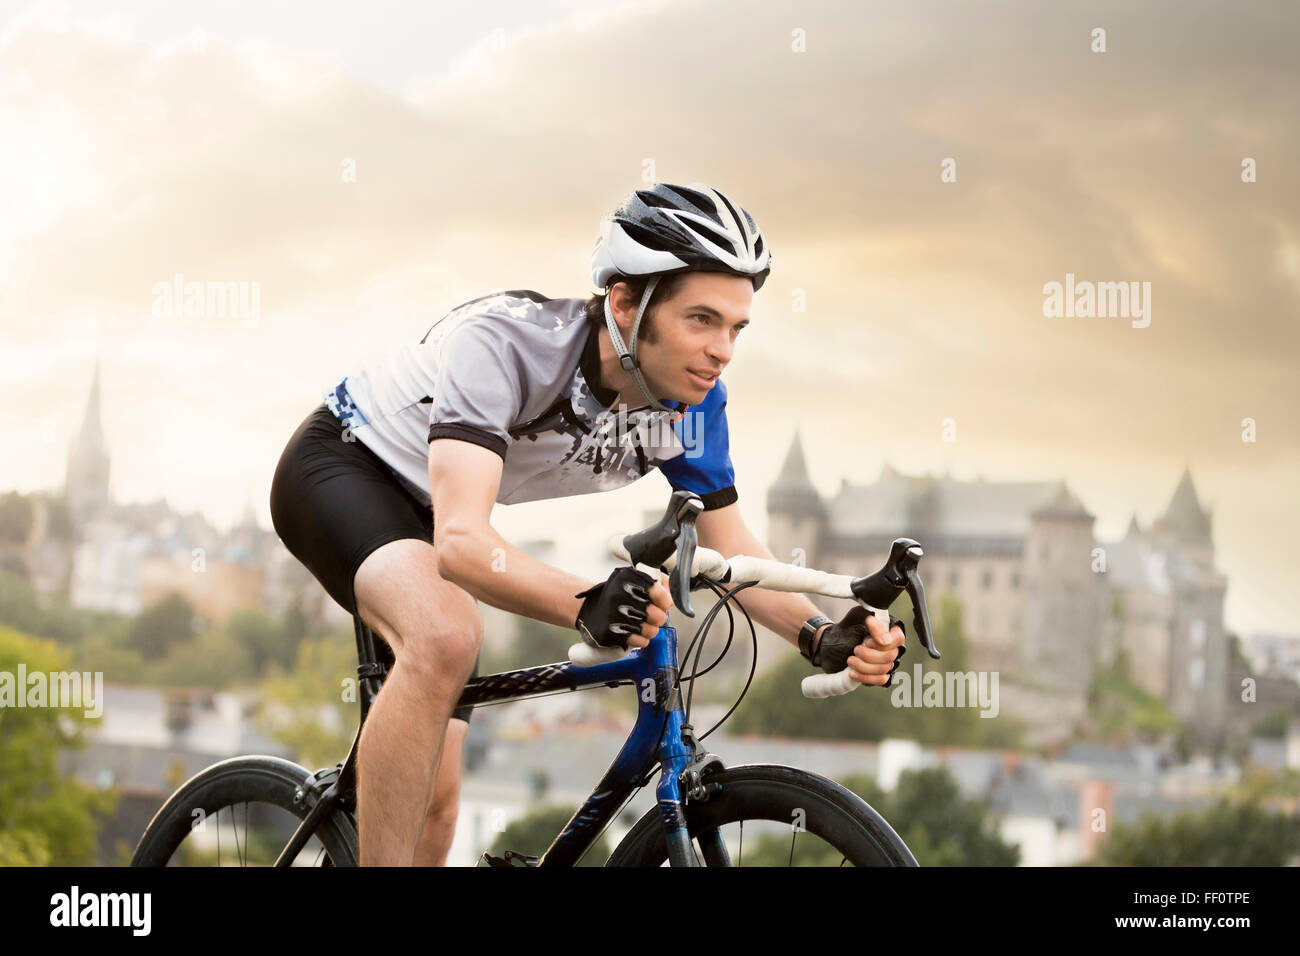 Caucasian man cycling outdoors Banque D'Images